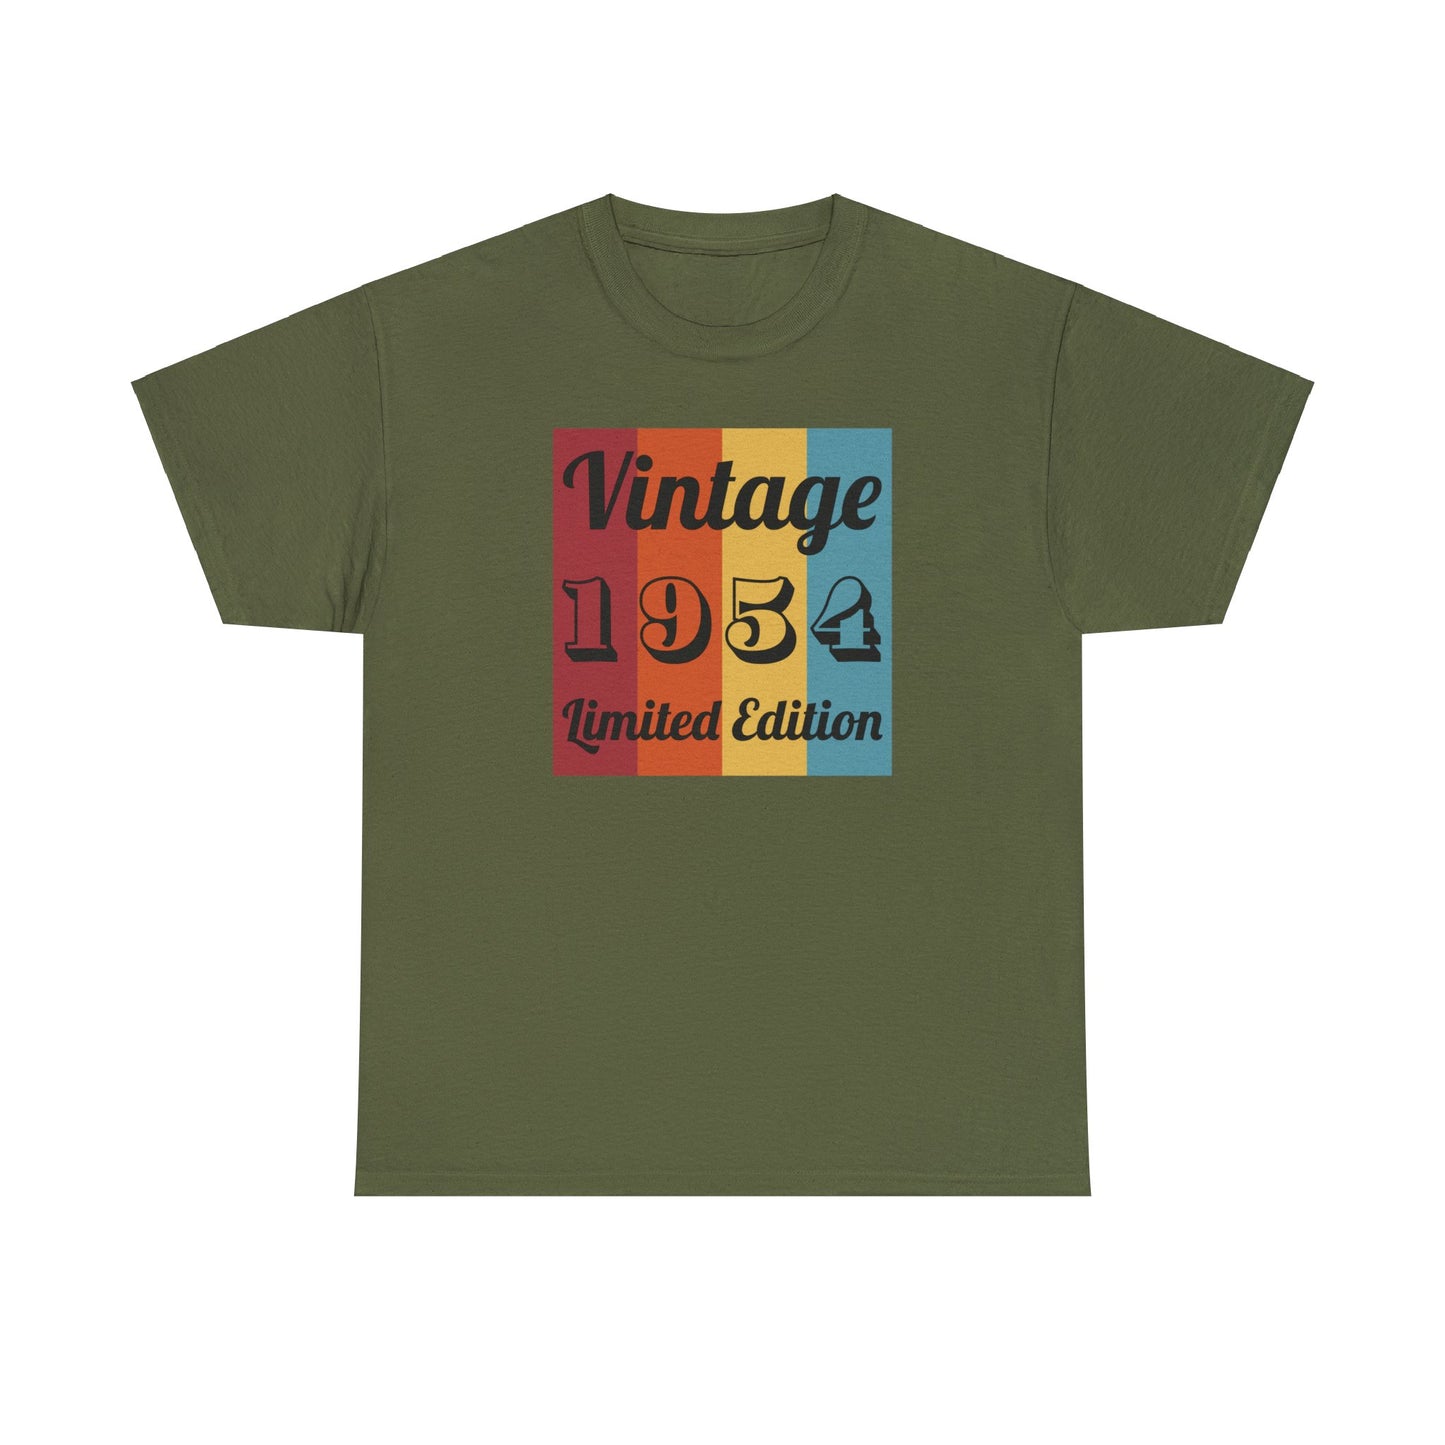 1954 T-Shirt For Vintage Limited Edition TShirt For Class Reunion Shirt For Birthday T Shirt For Birth Year Shirt For Graduation Year Shirt